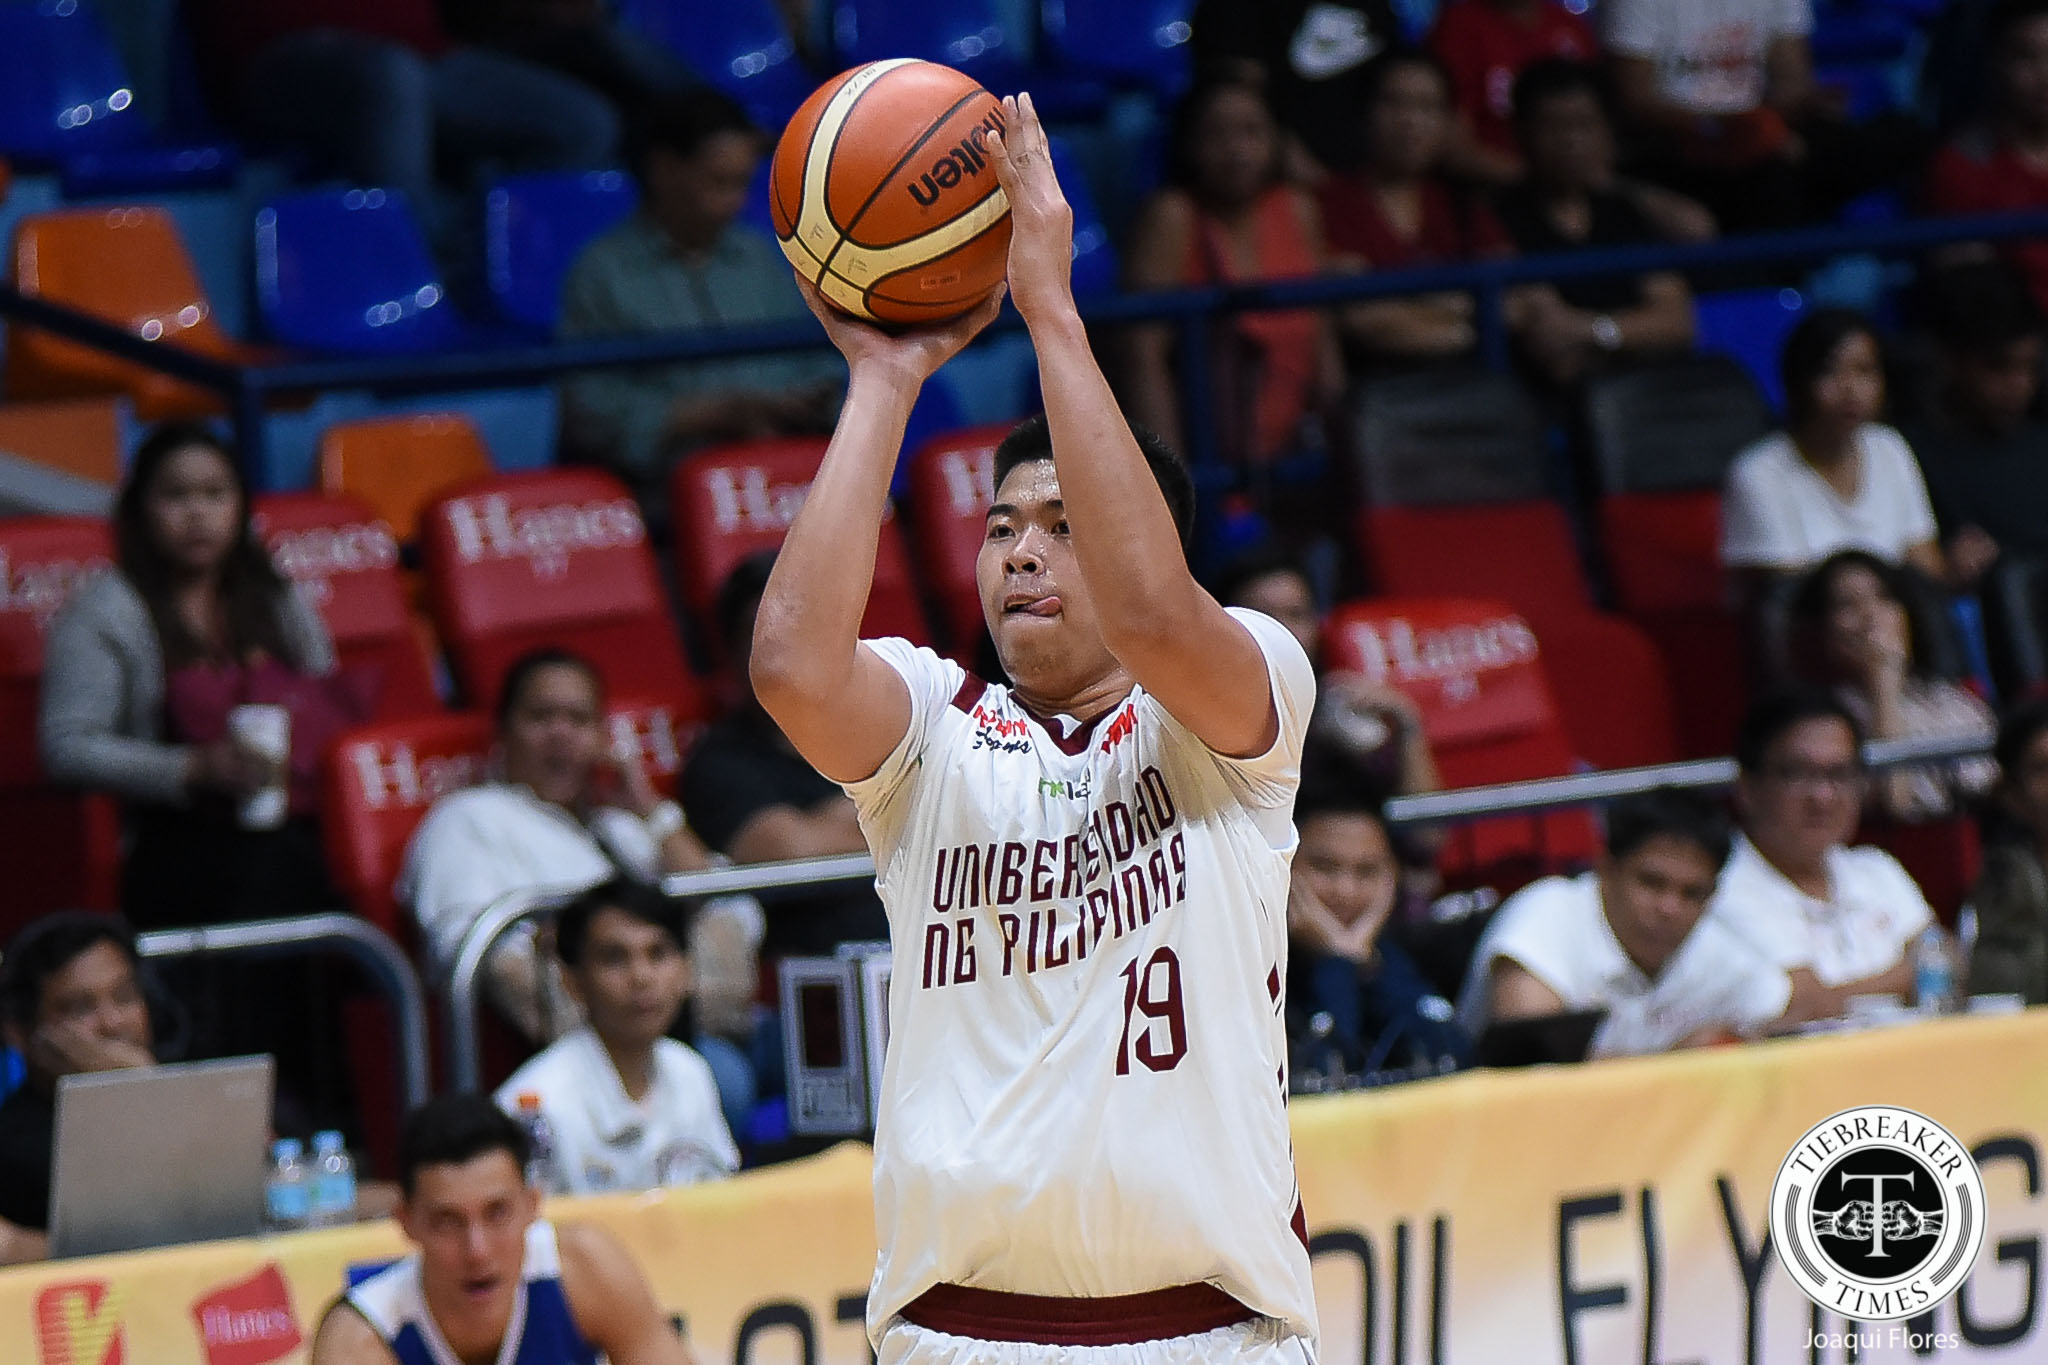 Filoil-2018-Gilas-Cadets-vs.-UP-Gozum-6817 Mixed emotions for Gozum after facing UP Basketball CSB News  - philippine sports news